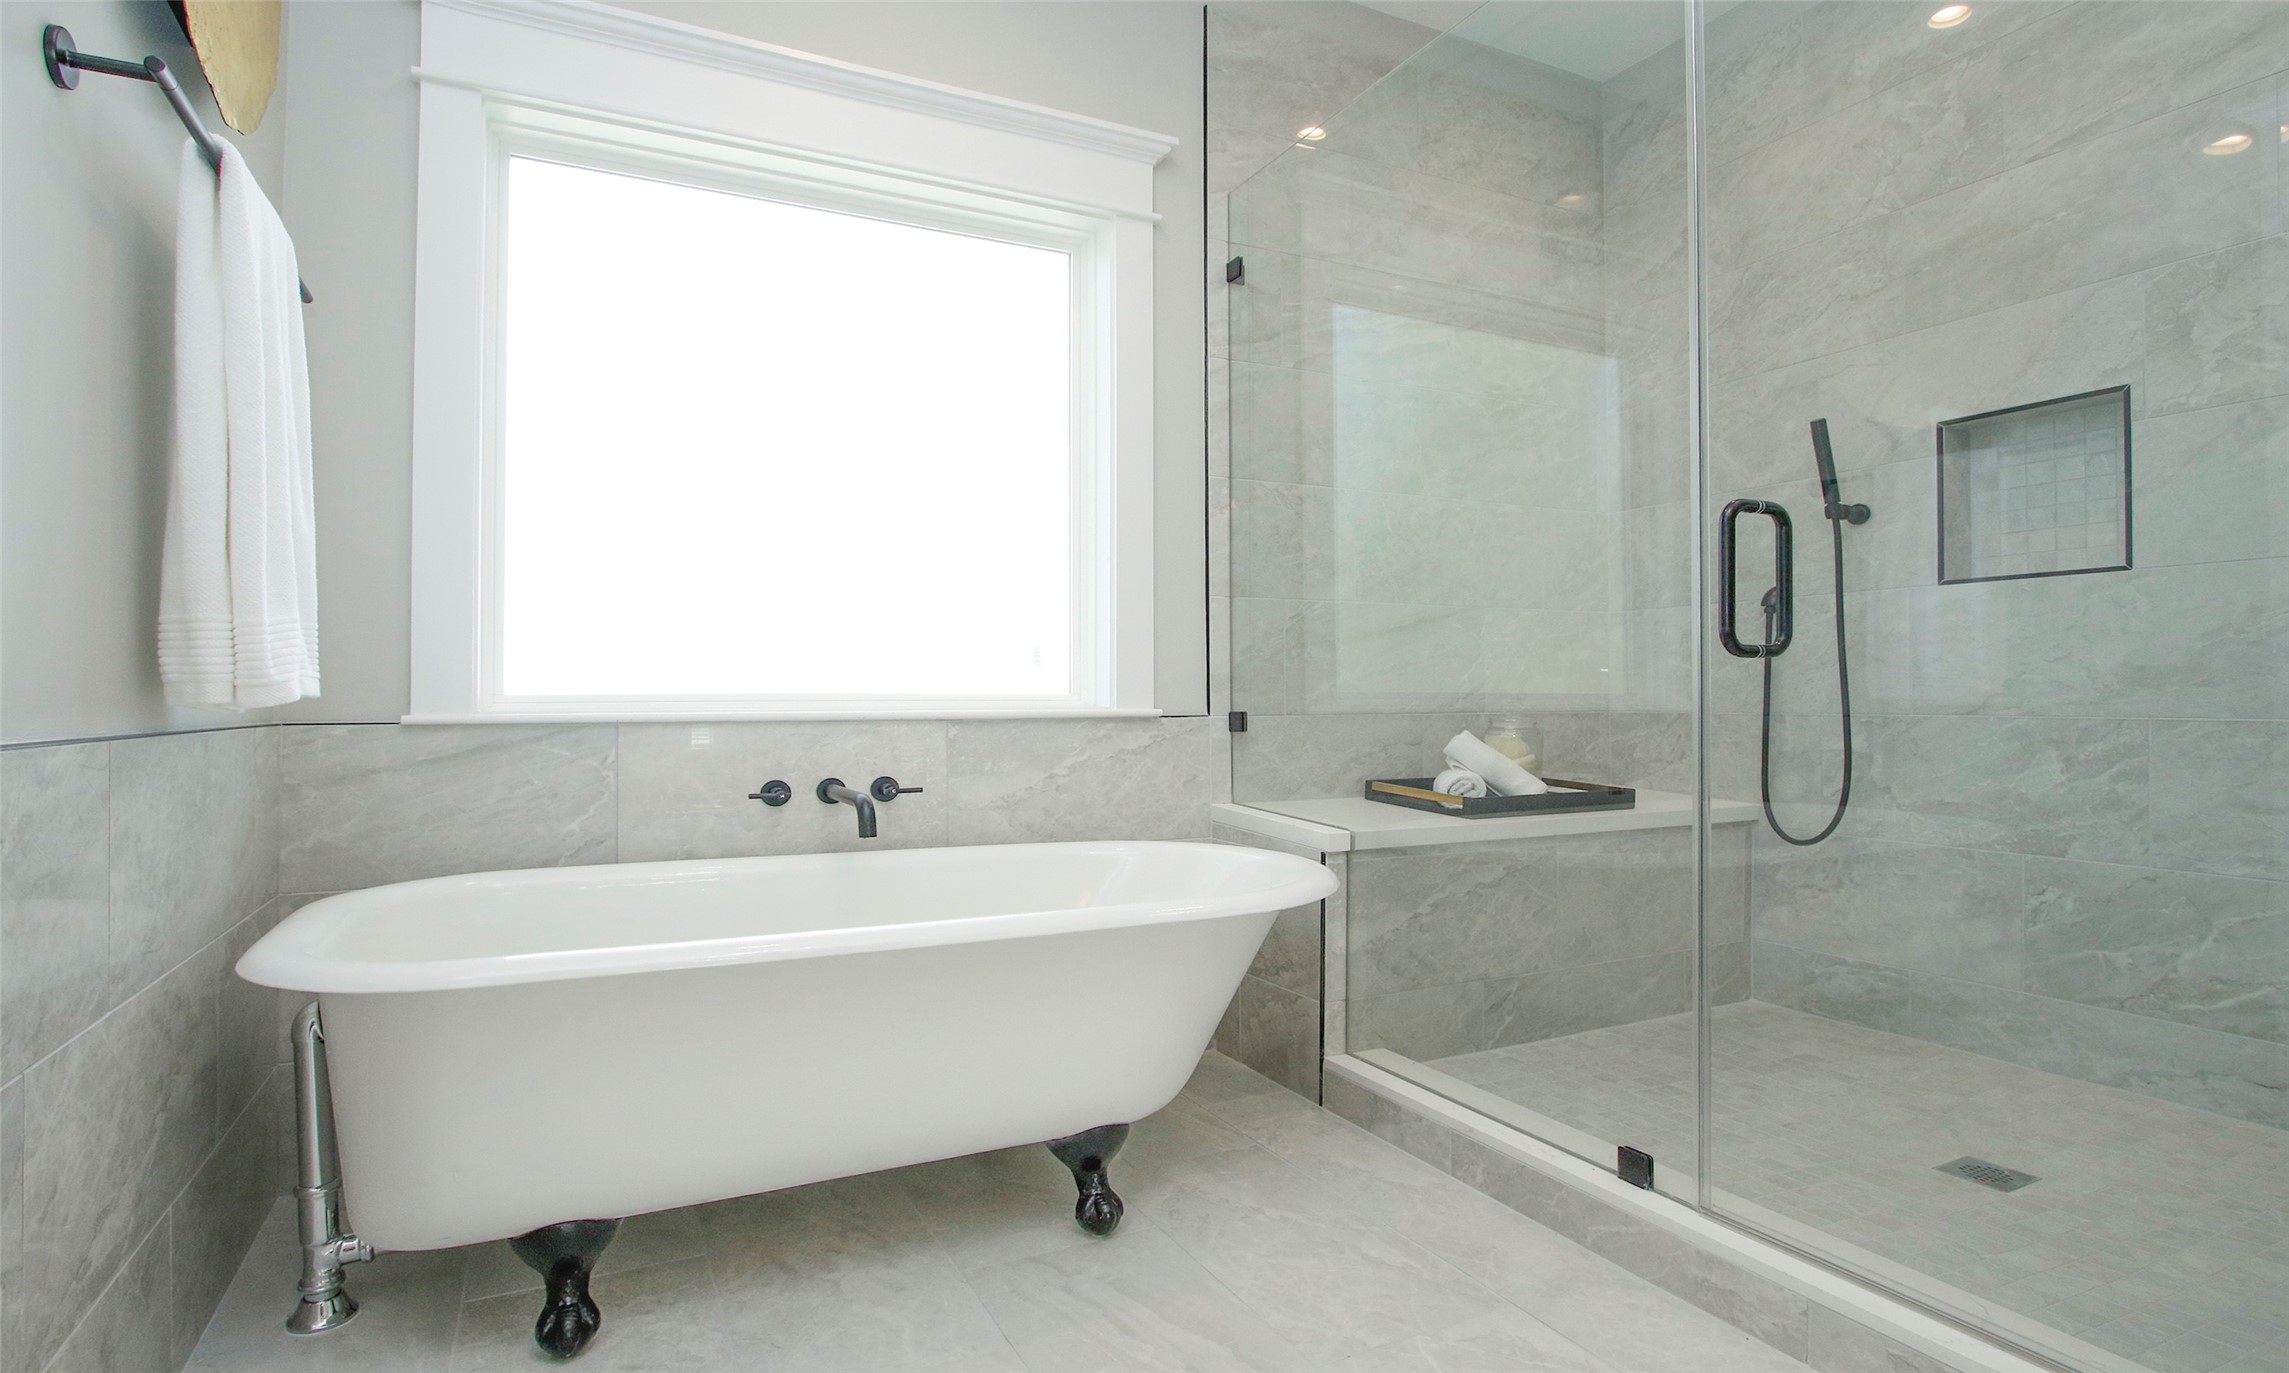 Primary Tub and Shower